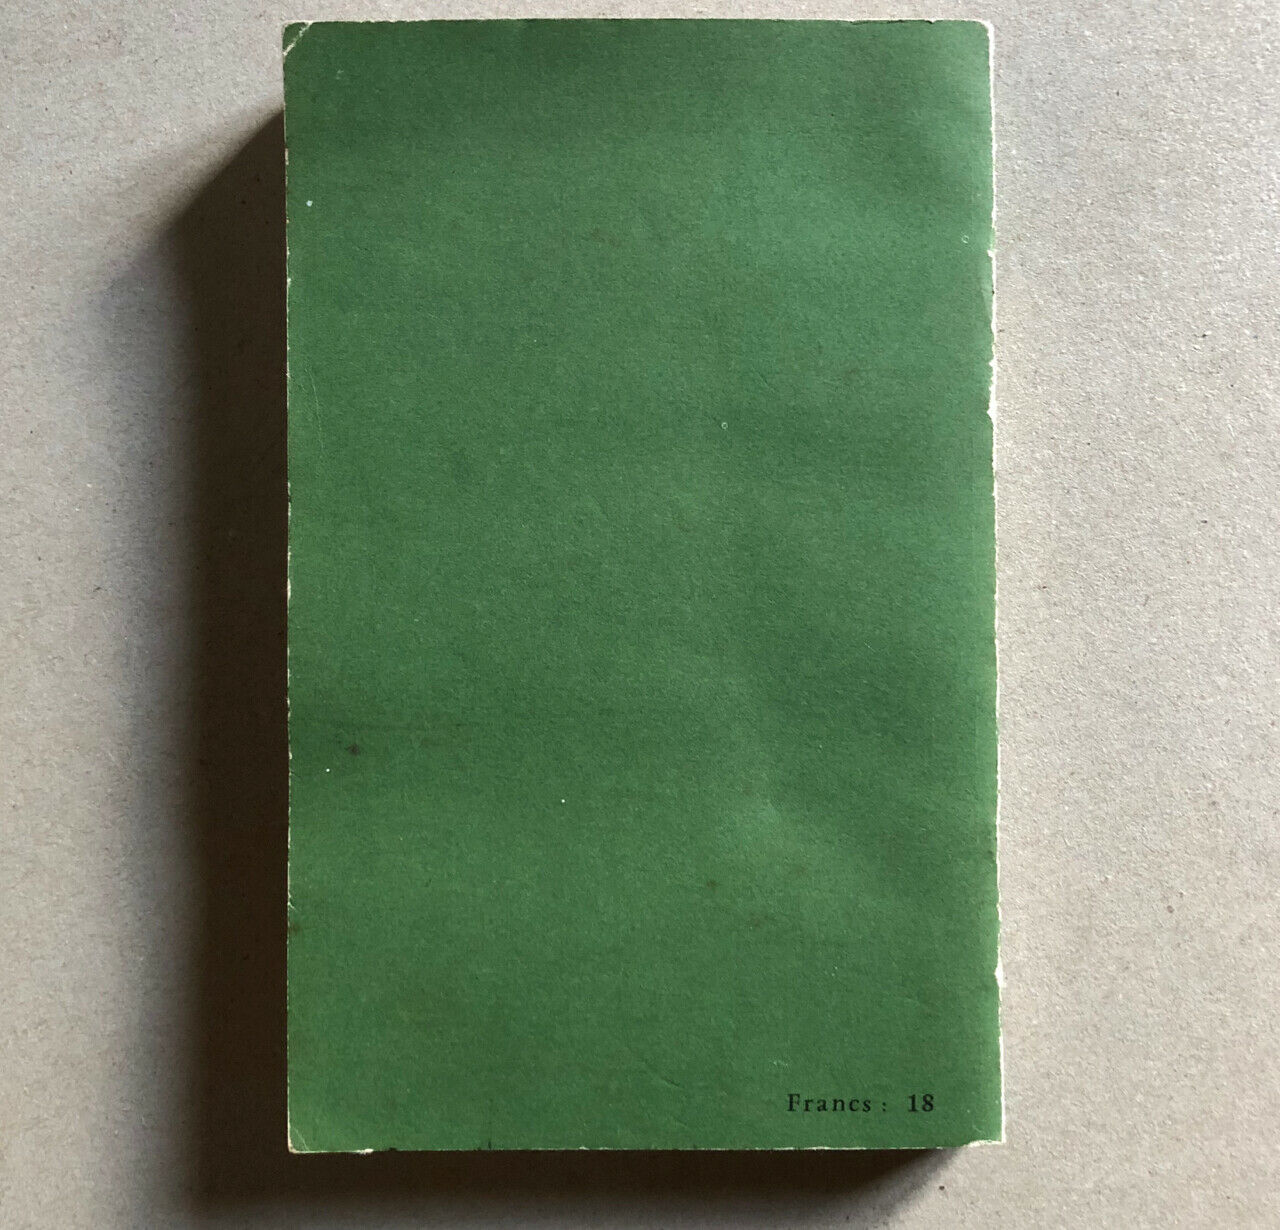 William Burroughs — The Naked lunch — Traveller's companion Olympia Press — 1965